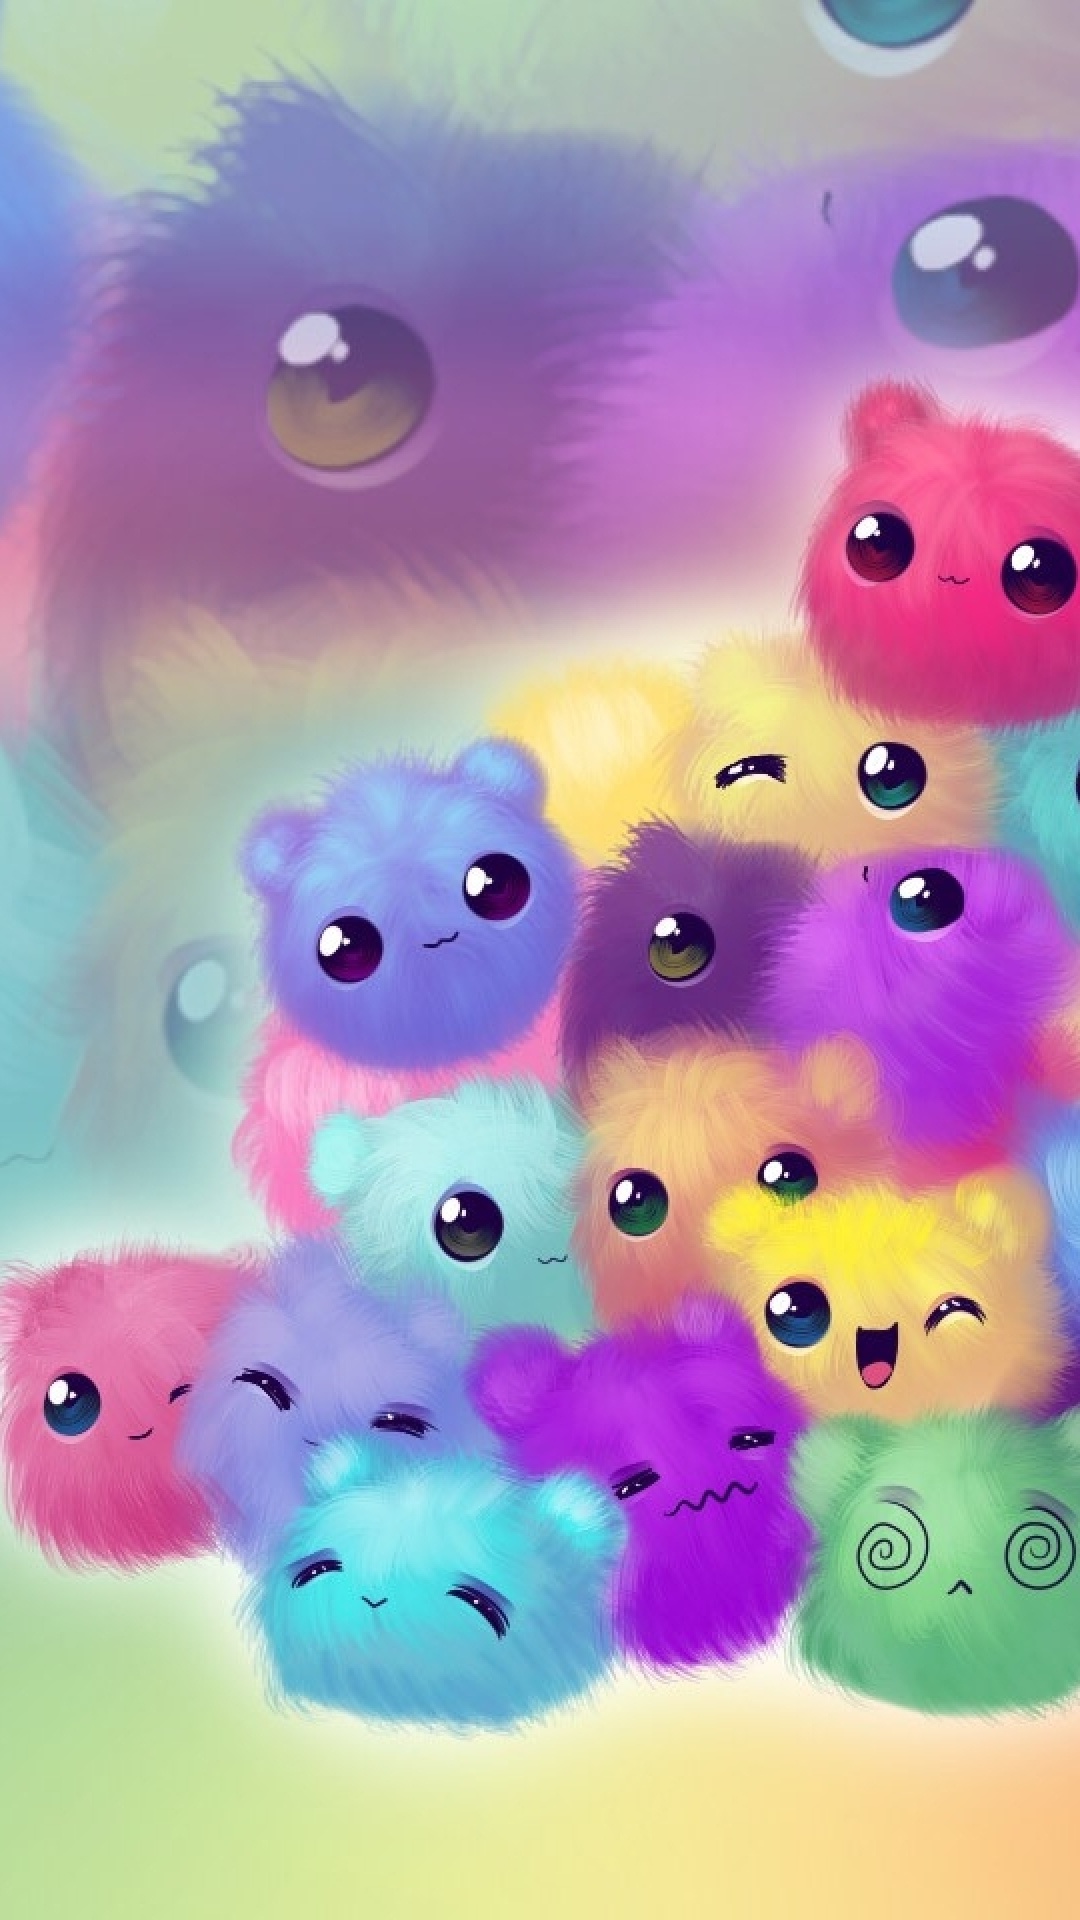 Free Download Cute Htc One Max 1080x1920 Wallpaper Android Wallpapers 1080x1920 For Your Desktop Mobile Tablet Explore 75 Cute Wallpapers Cute Wallpapers For Laptops Cute Wallpapers For Girls Cute Wallpapers Tumblr